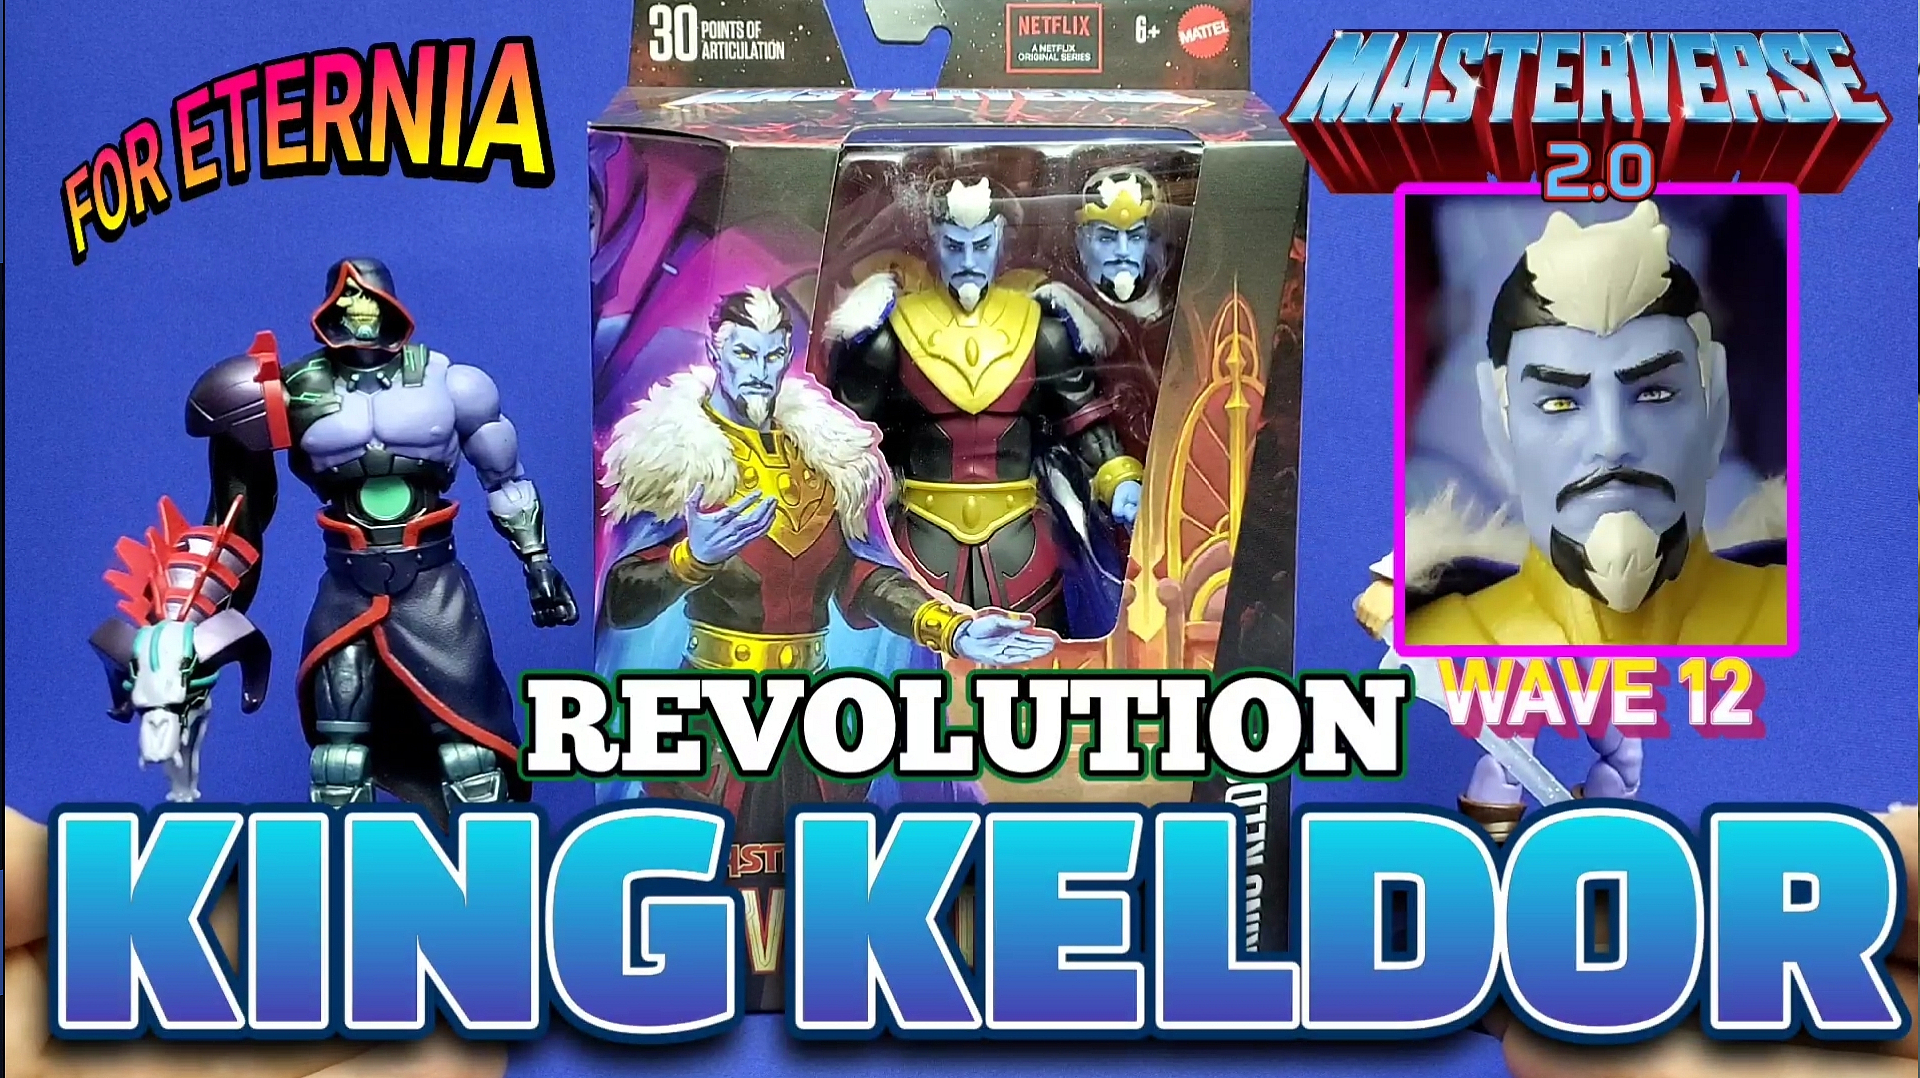 UNBOXING & REVIEW: Masterverse KING KELDOR Wave 12 ”Masters of the Universe: Revolution” Action Figure